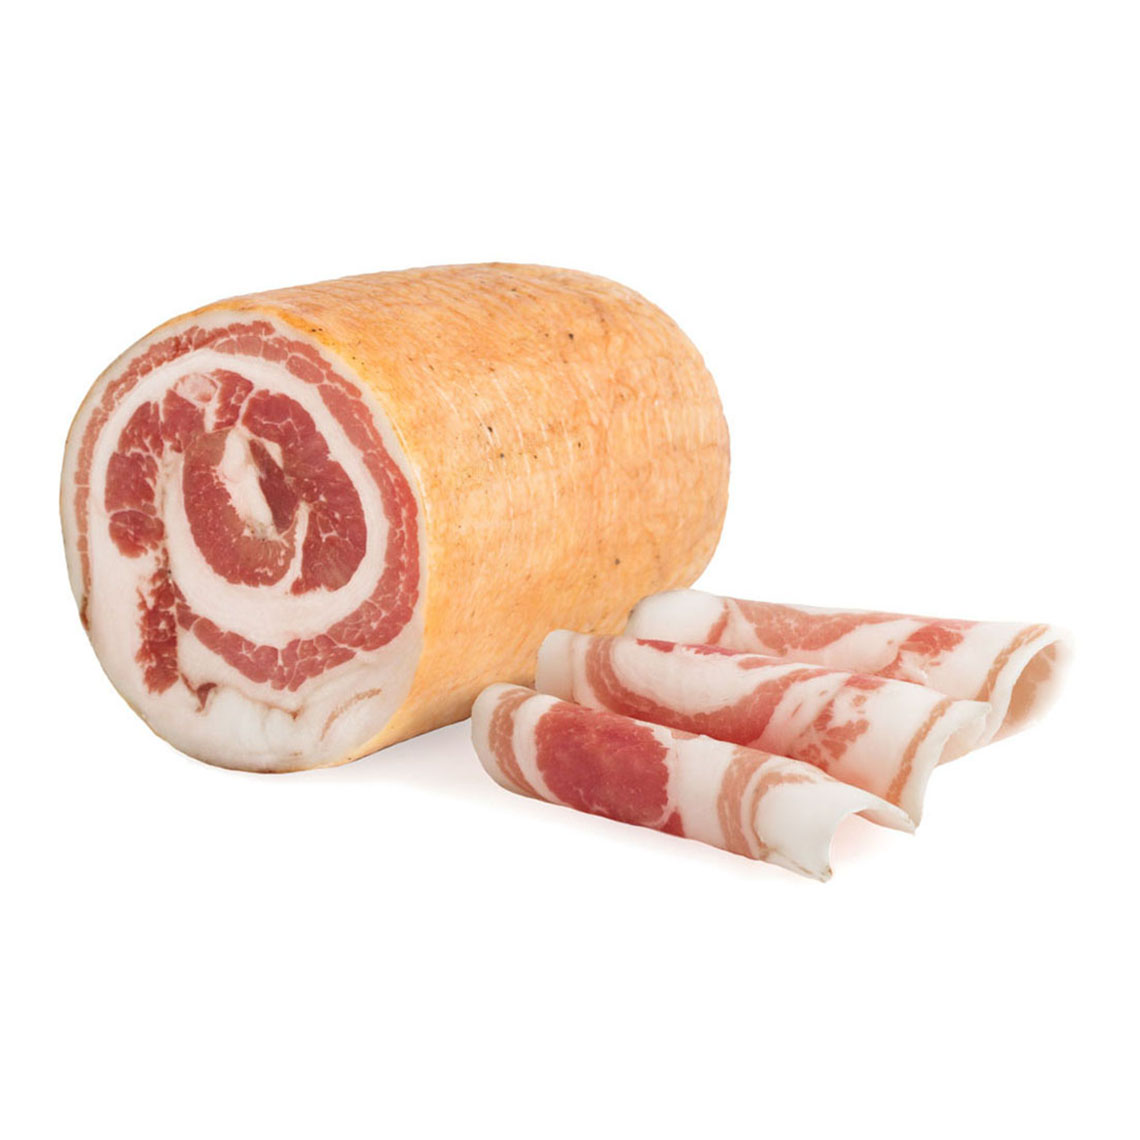 ROLLED BACON 2